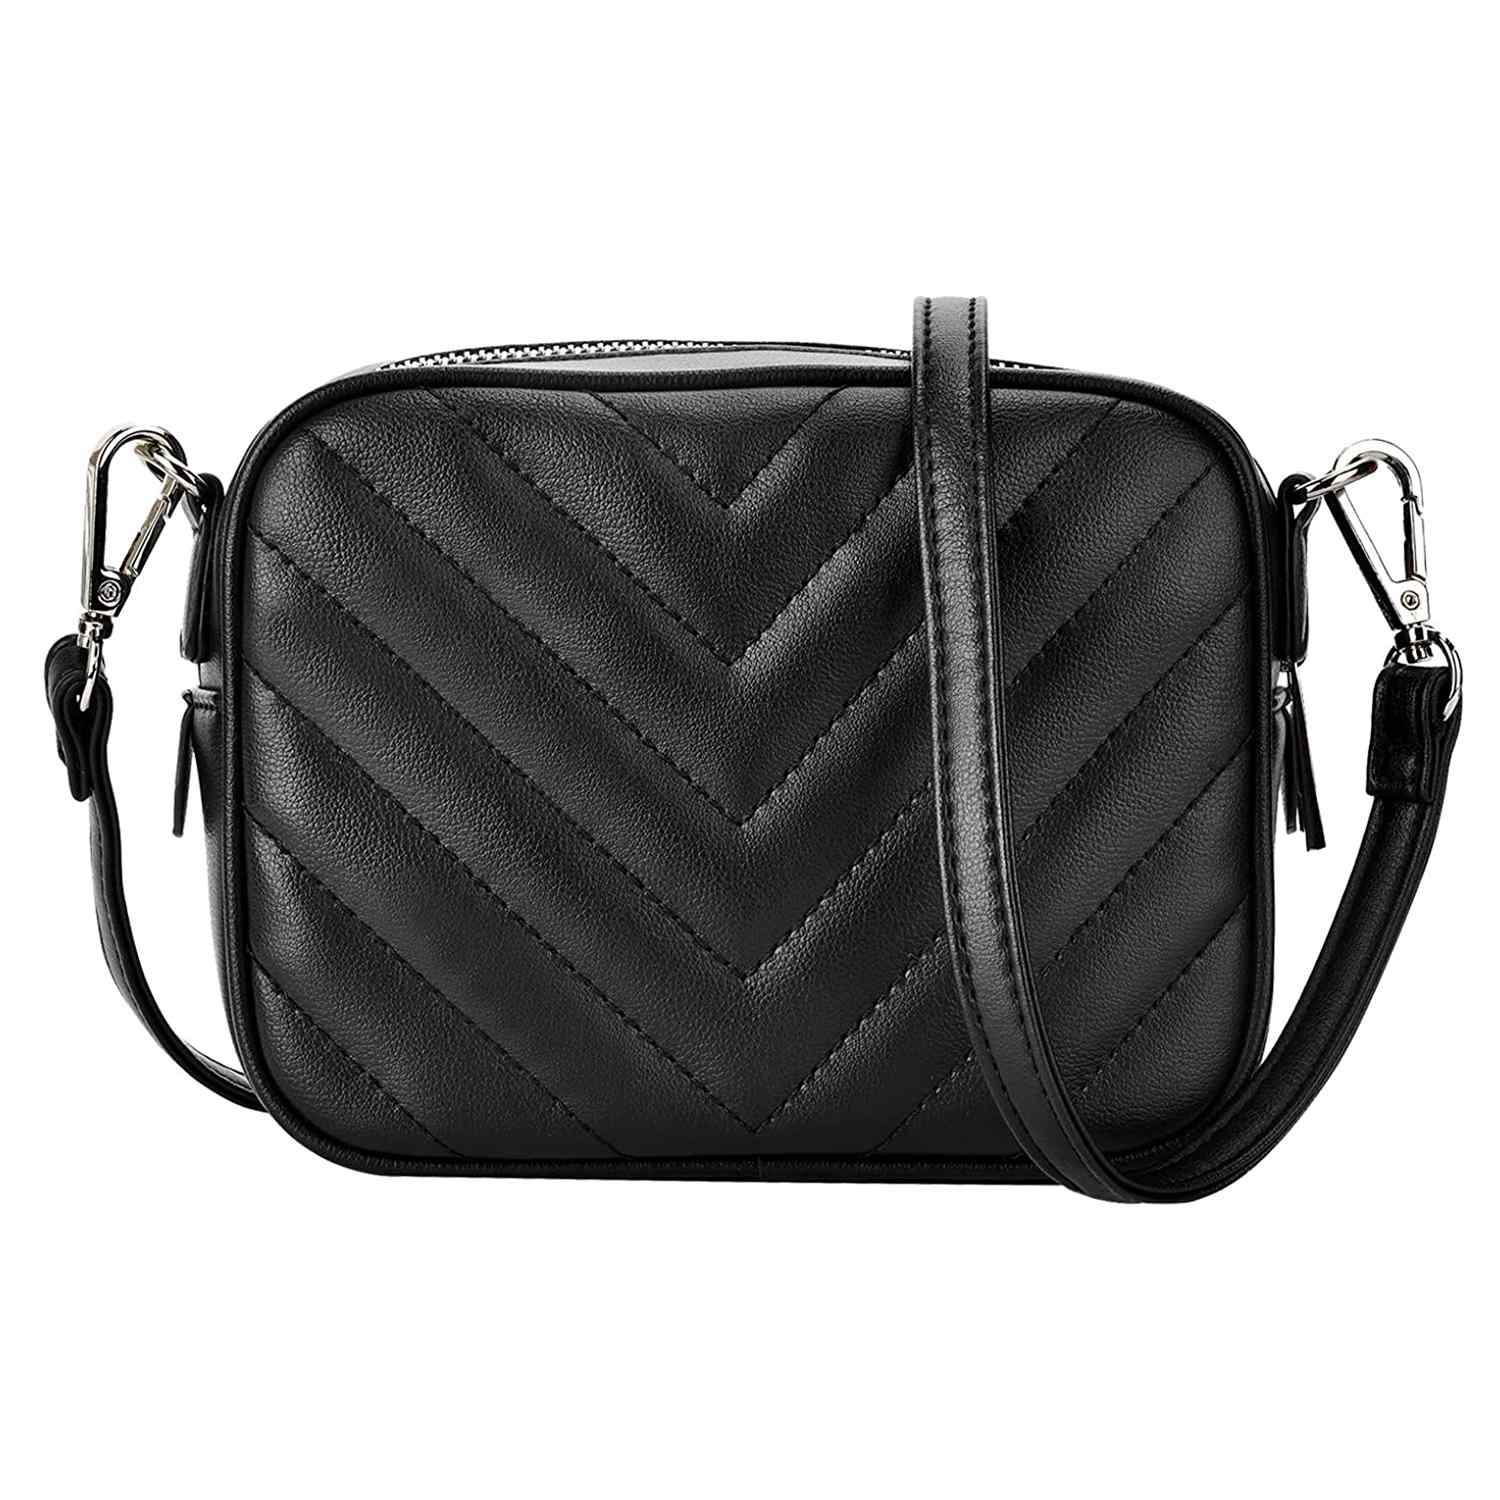 10 Amazon Prime Day Purse and Backpack Deals Under $30 | www.bagssaleusa.com